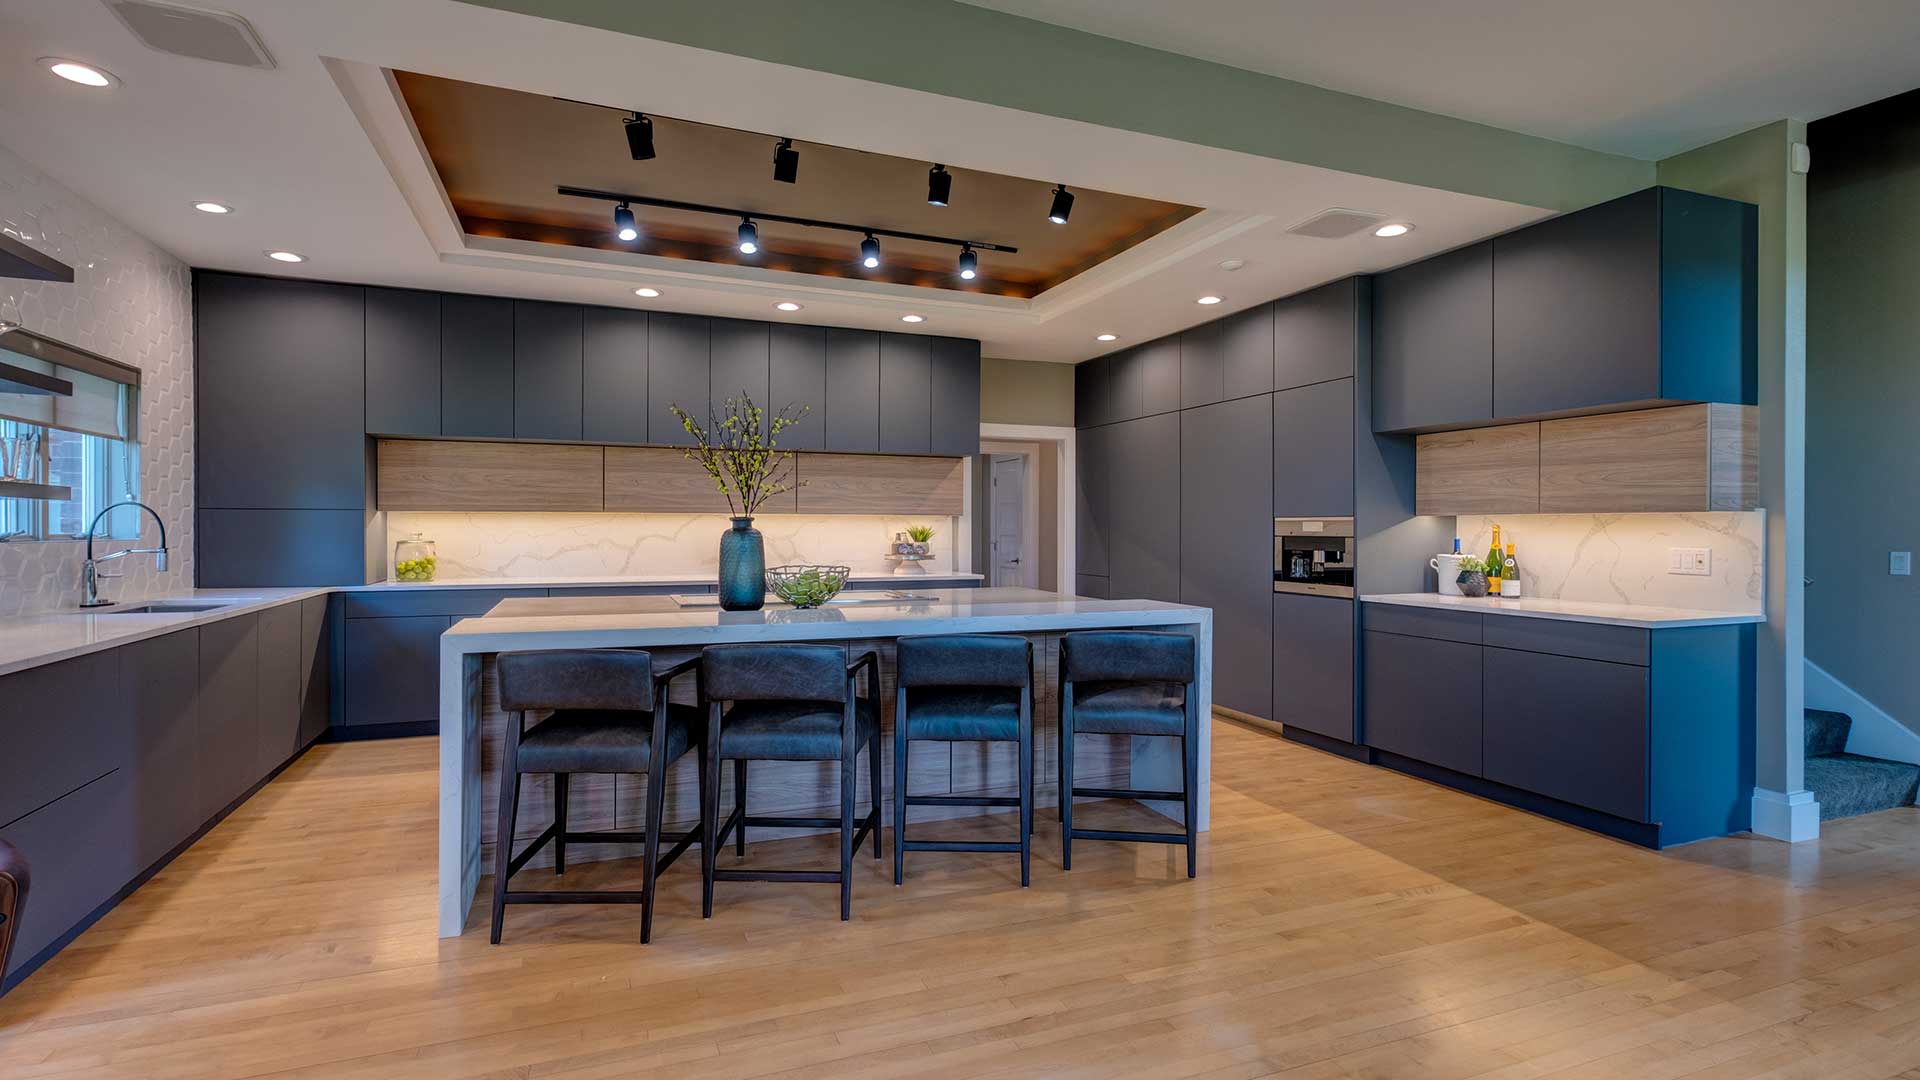 Modern Kitchen design with custom cabinetry and island